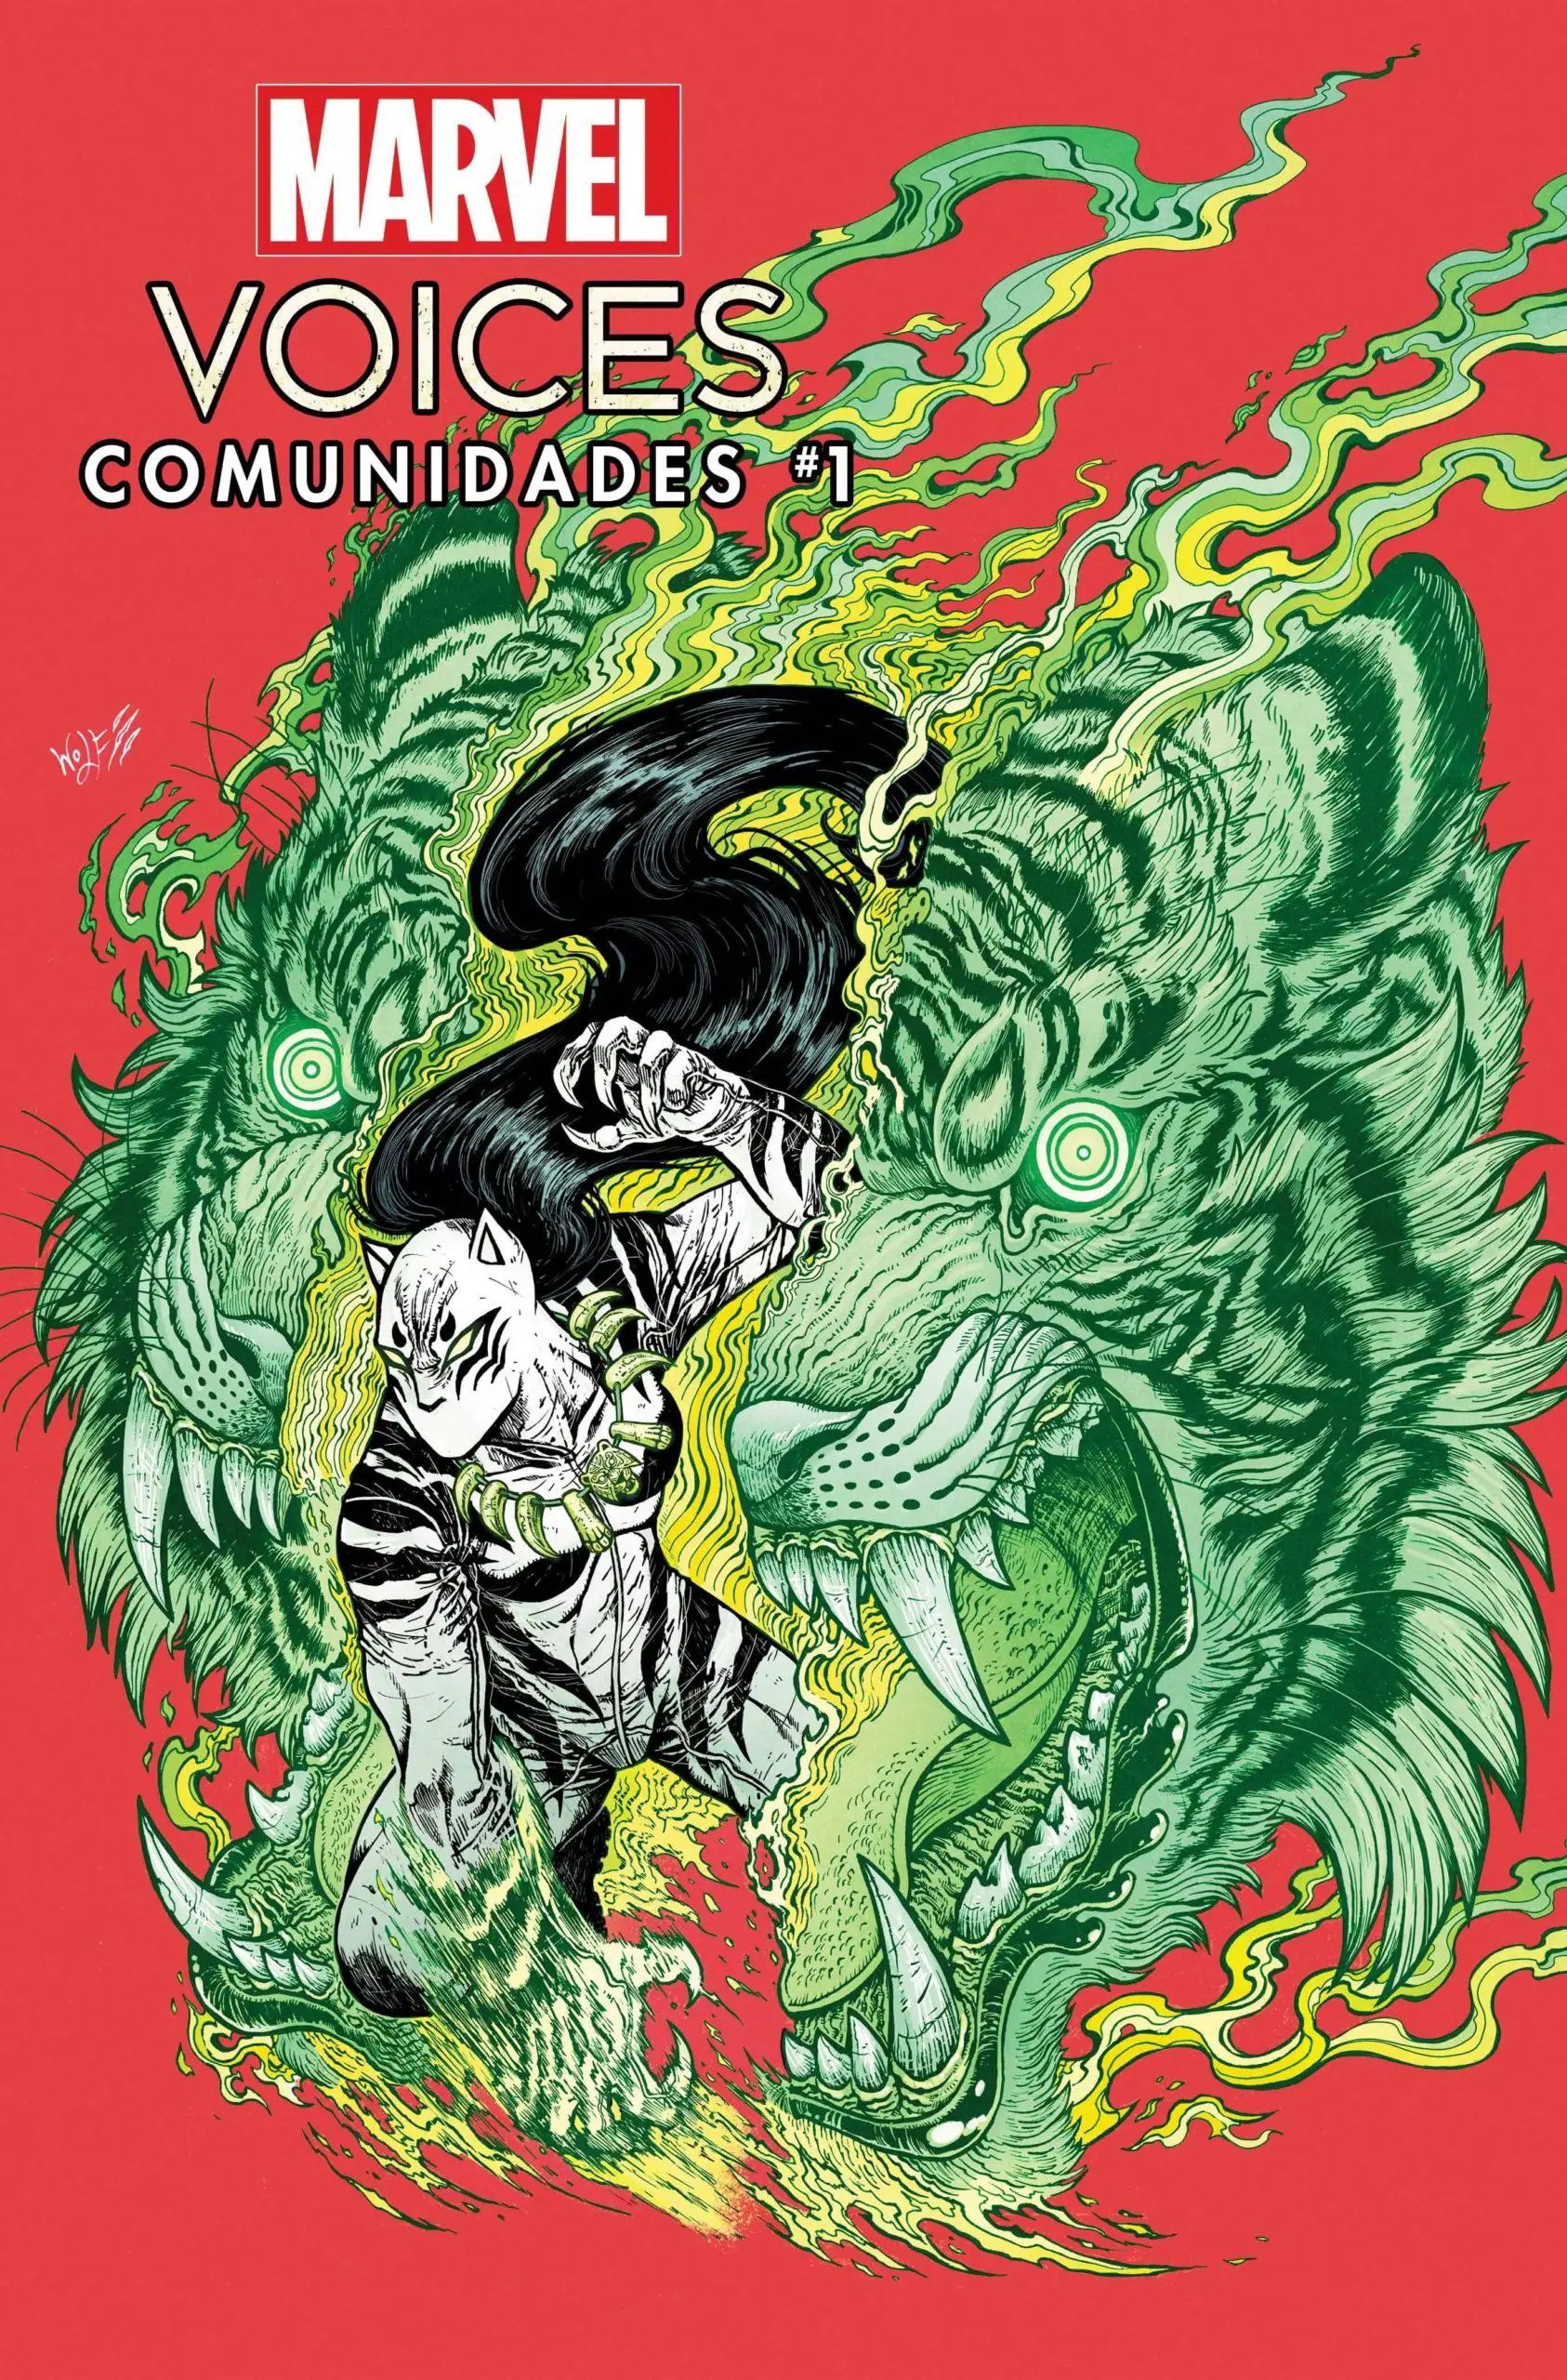 MARVEL'S VOICES- COMUNIDADES #1 Variant Cover by Maria Wolf & Mike Spicer